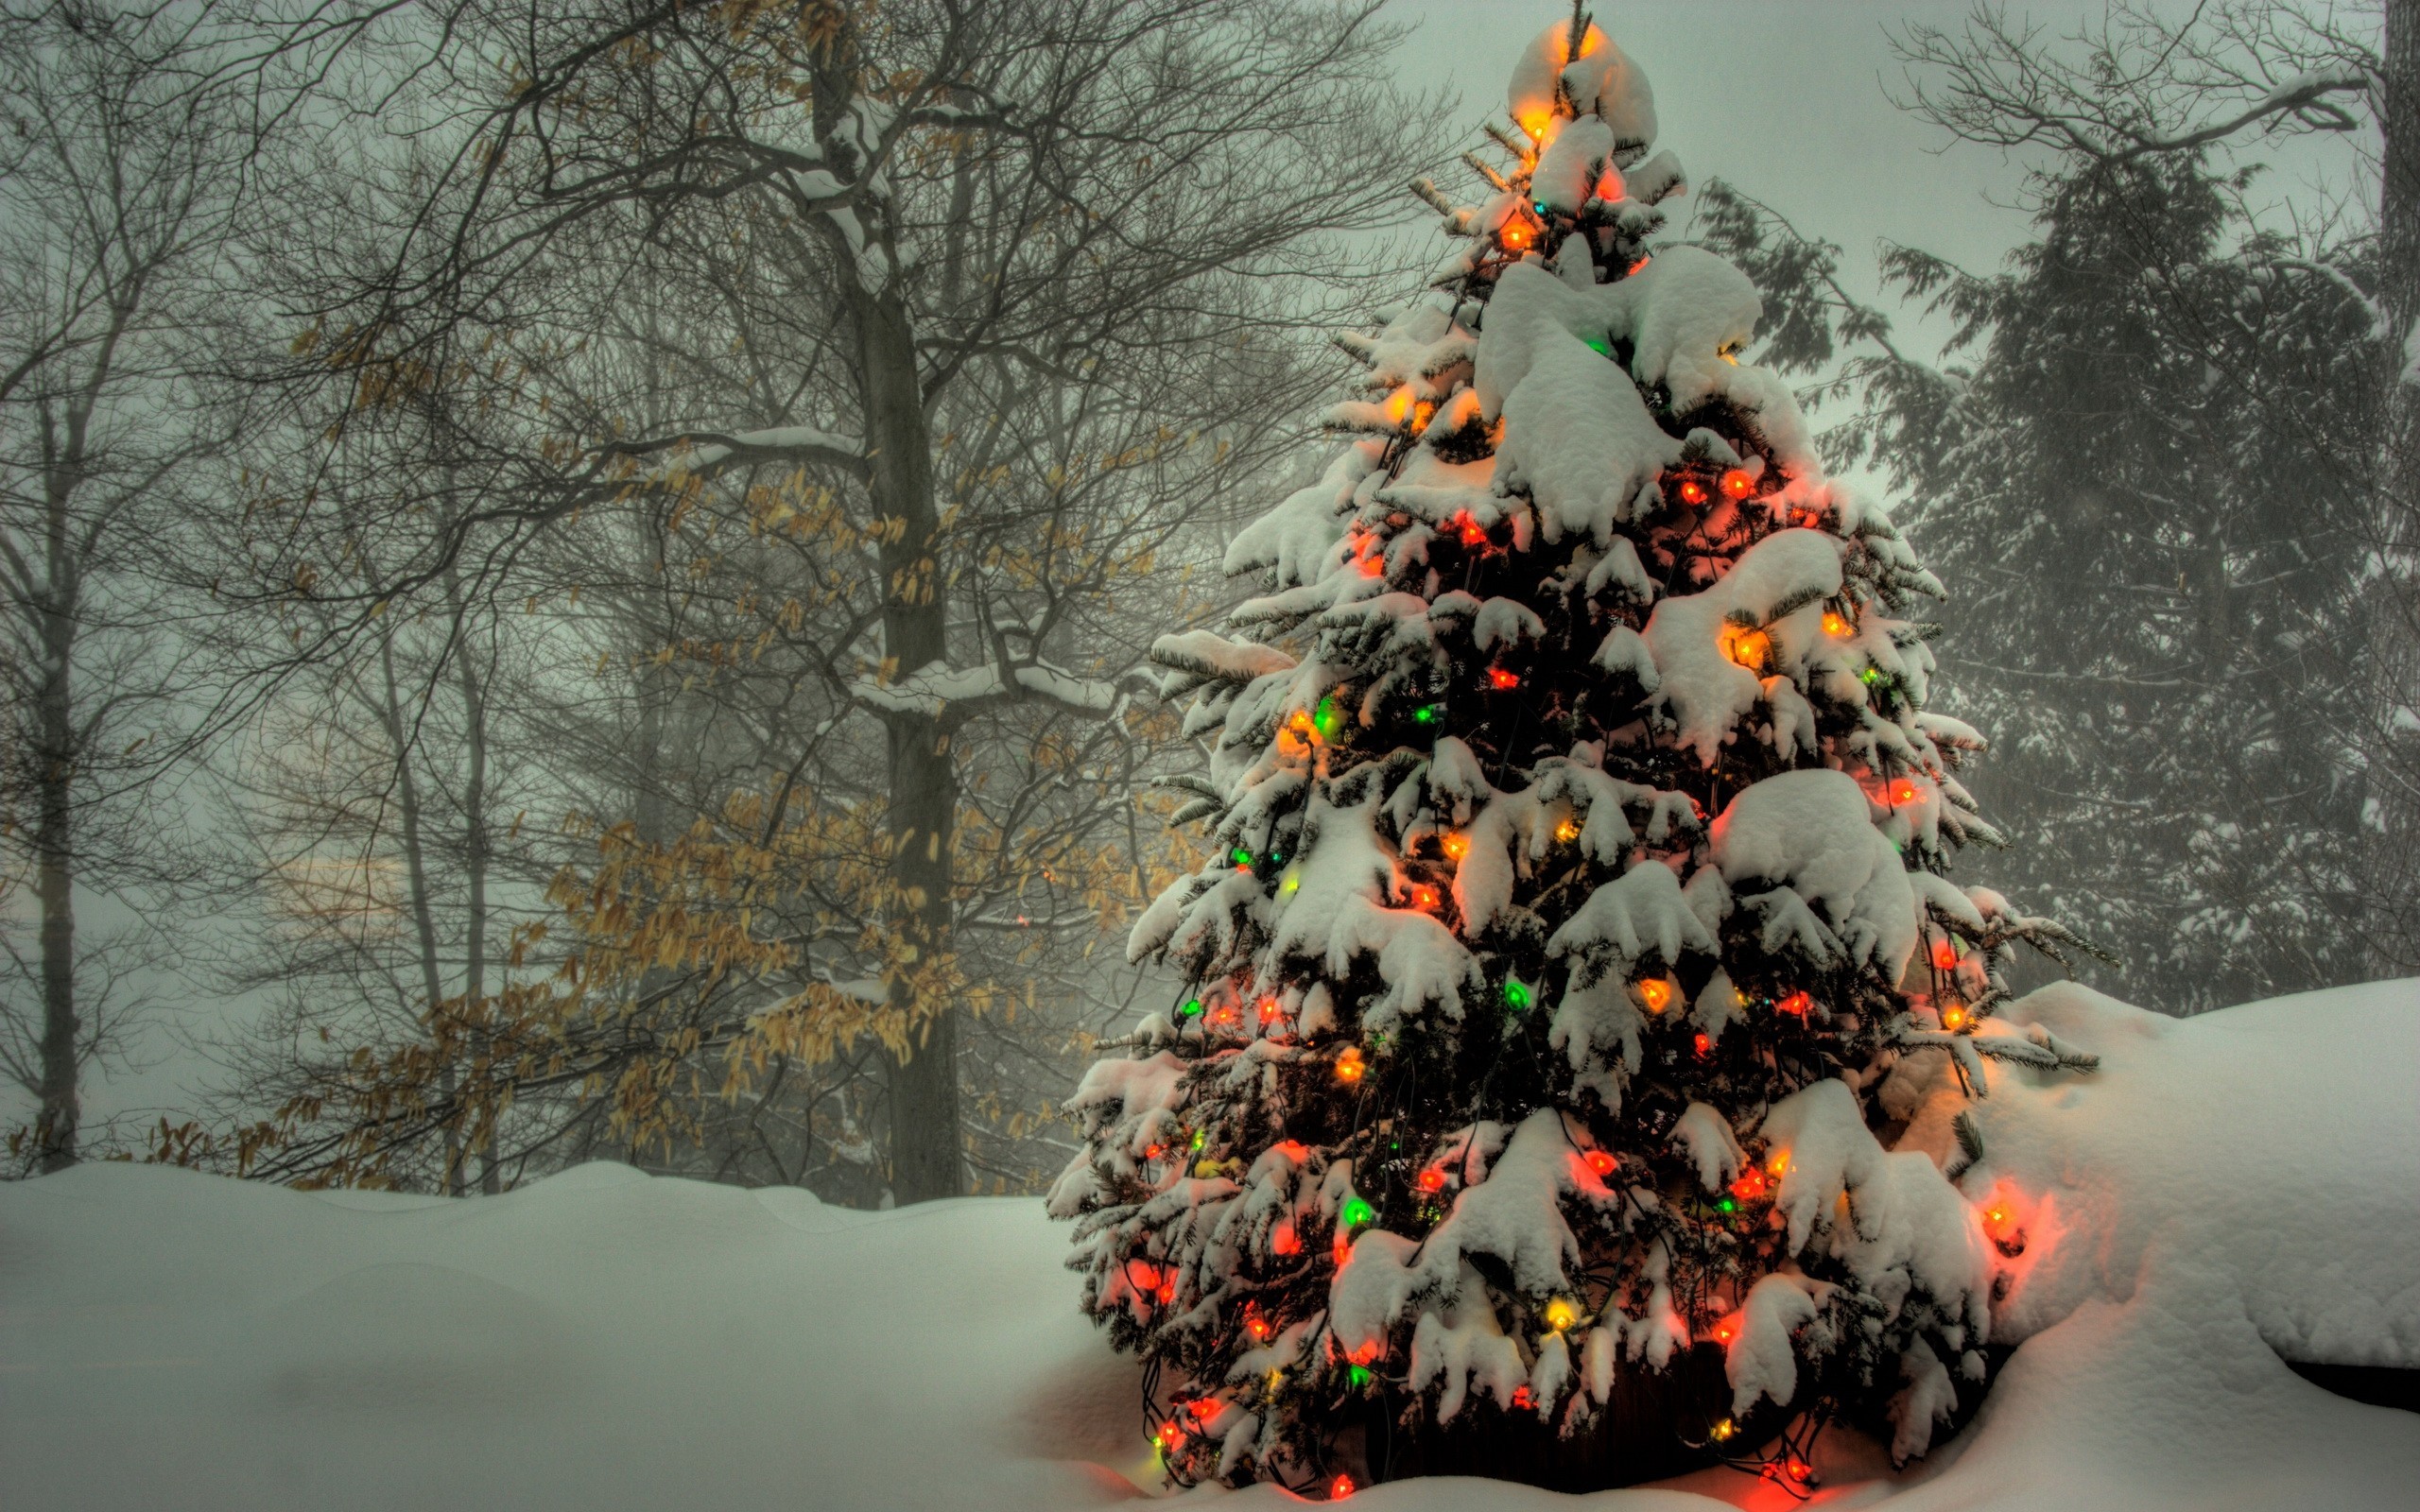 2560x1600 499 best wallpaper images on Pinterest | Christmas scenes, Snow and  Christmas art